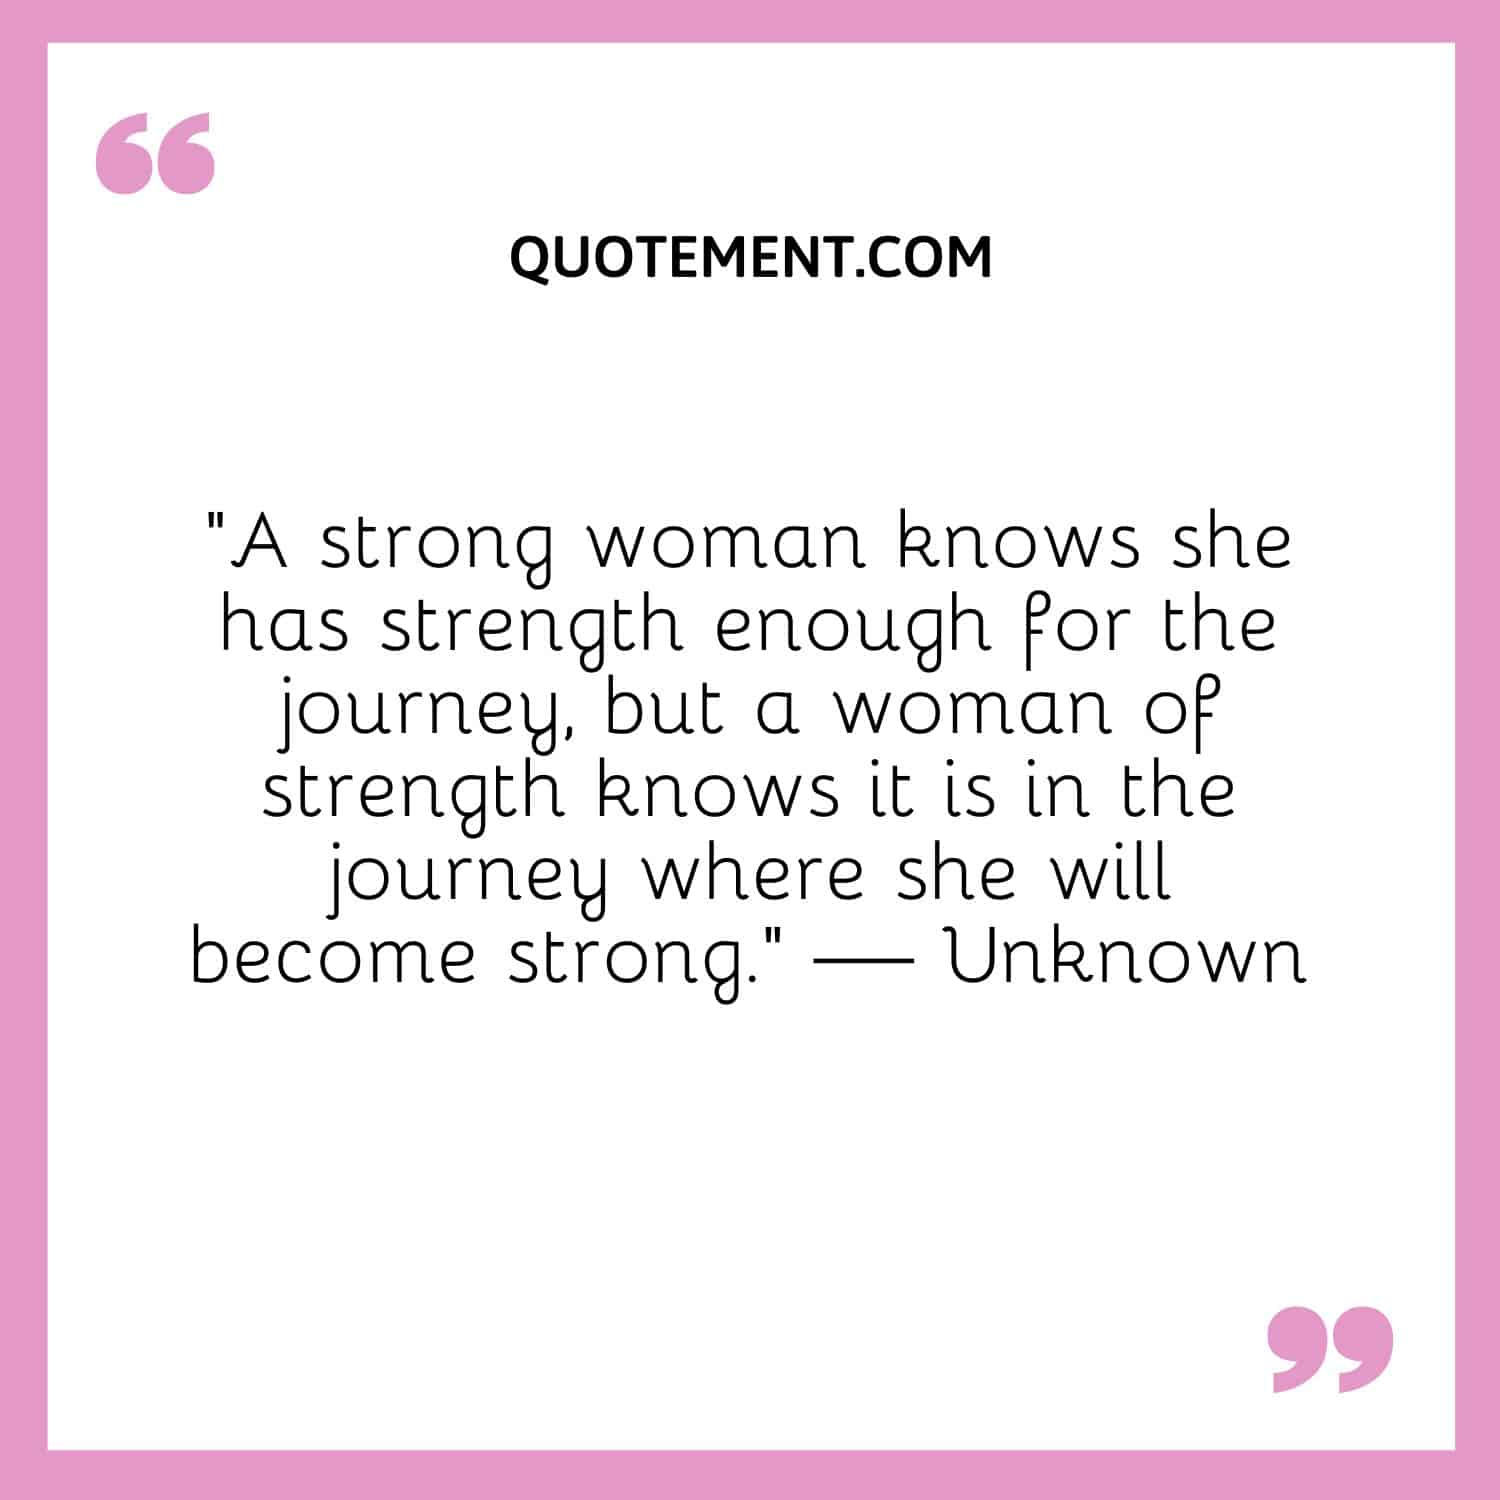 A strong woman knows she has strength enough for the journey, but a woman of strength knows it is in the journey where she will become strong